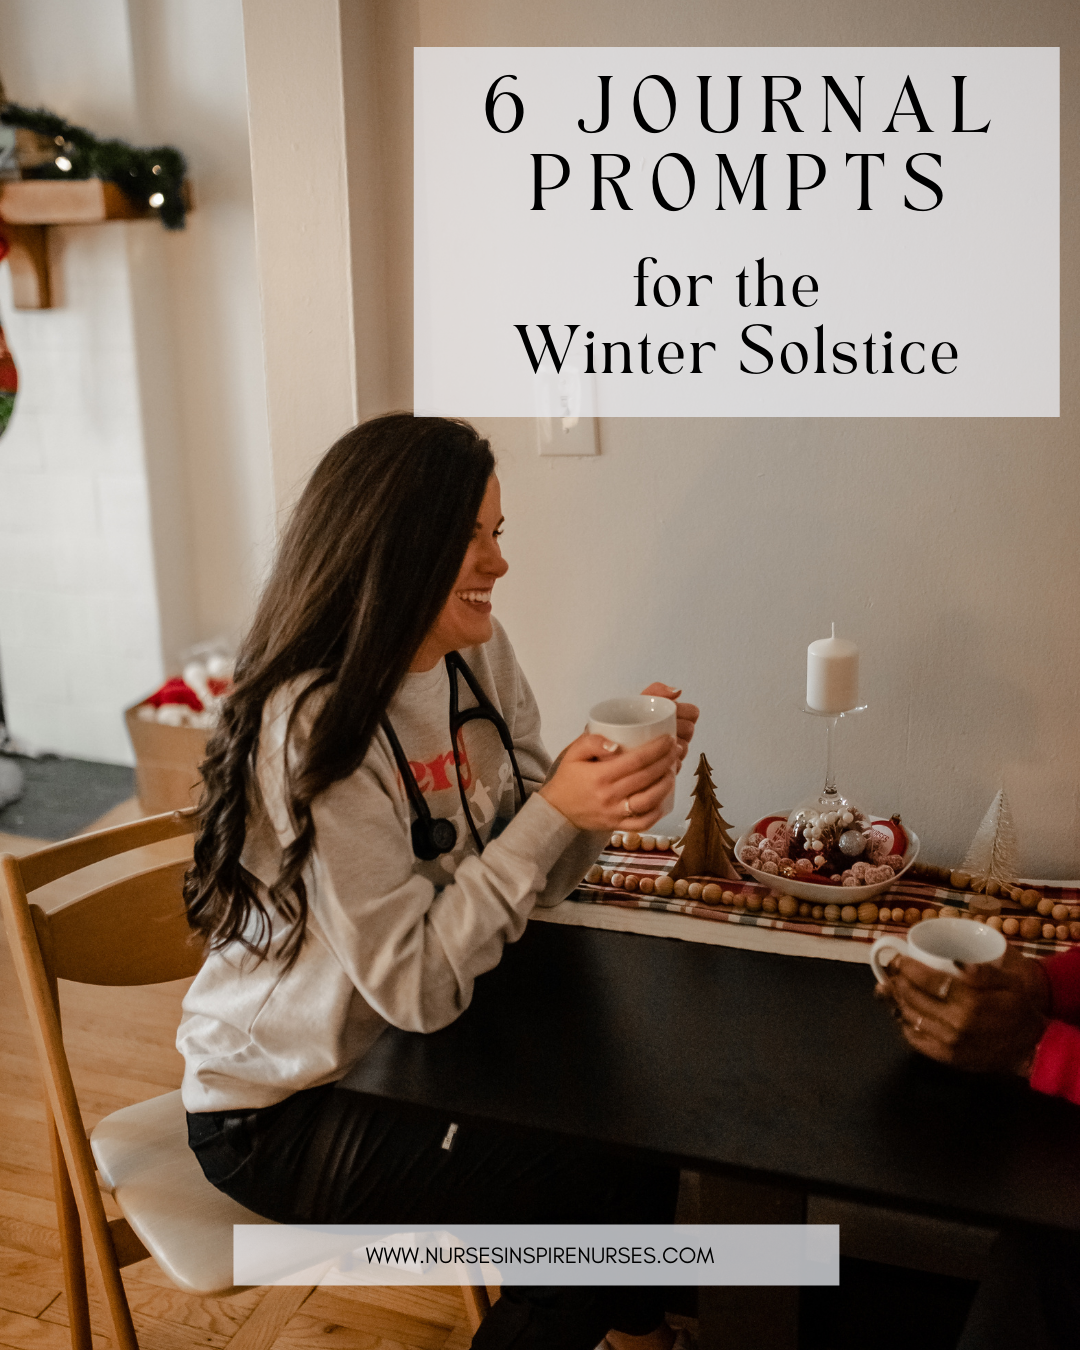 6 Journal Prompts for the Winter Solstice